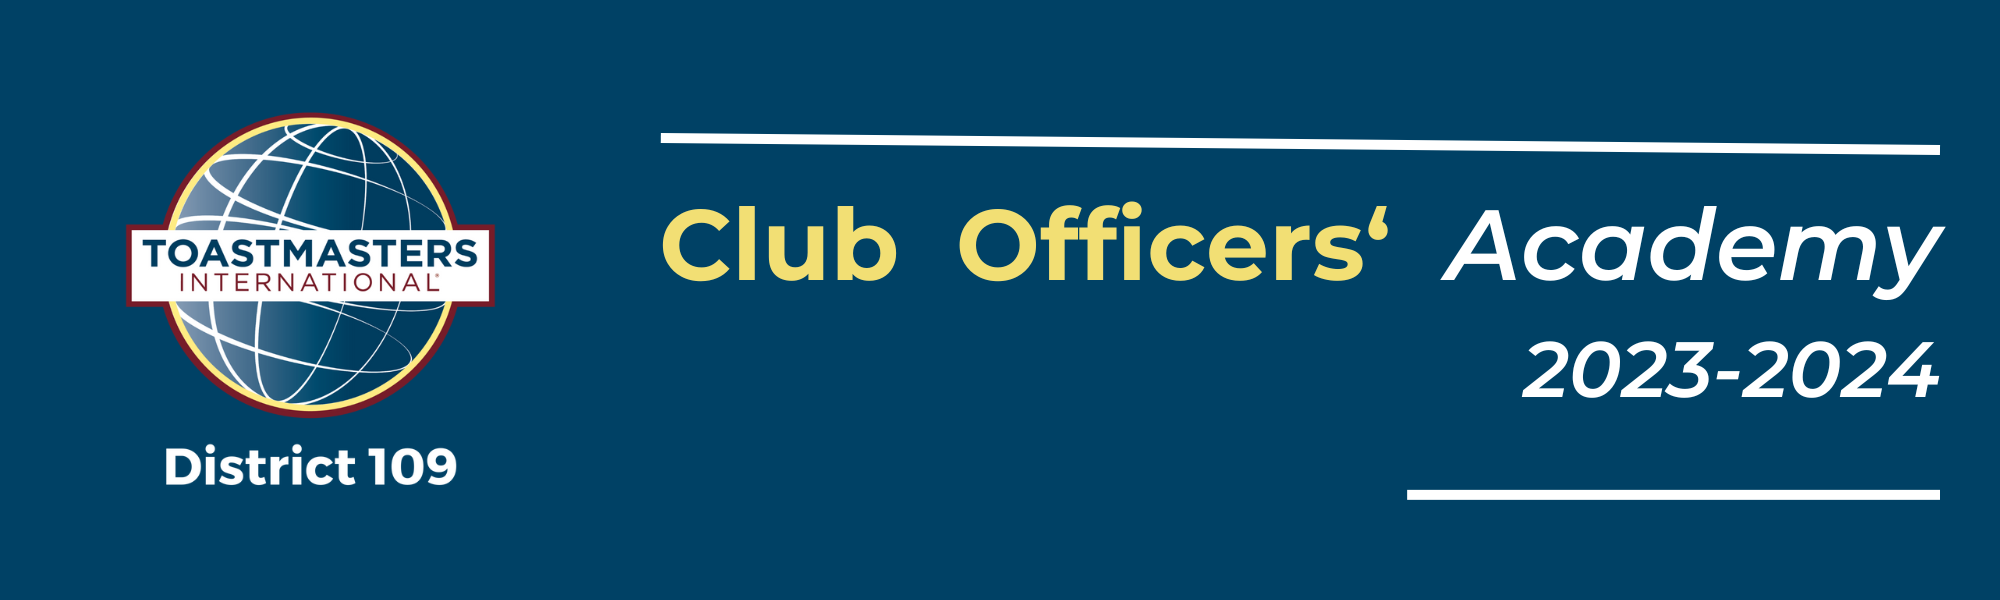 District 109 Club Officers' Academy #1 November 2023 - January 2024